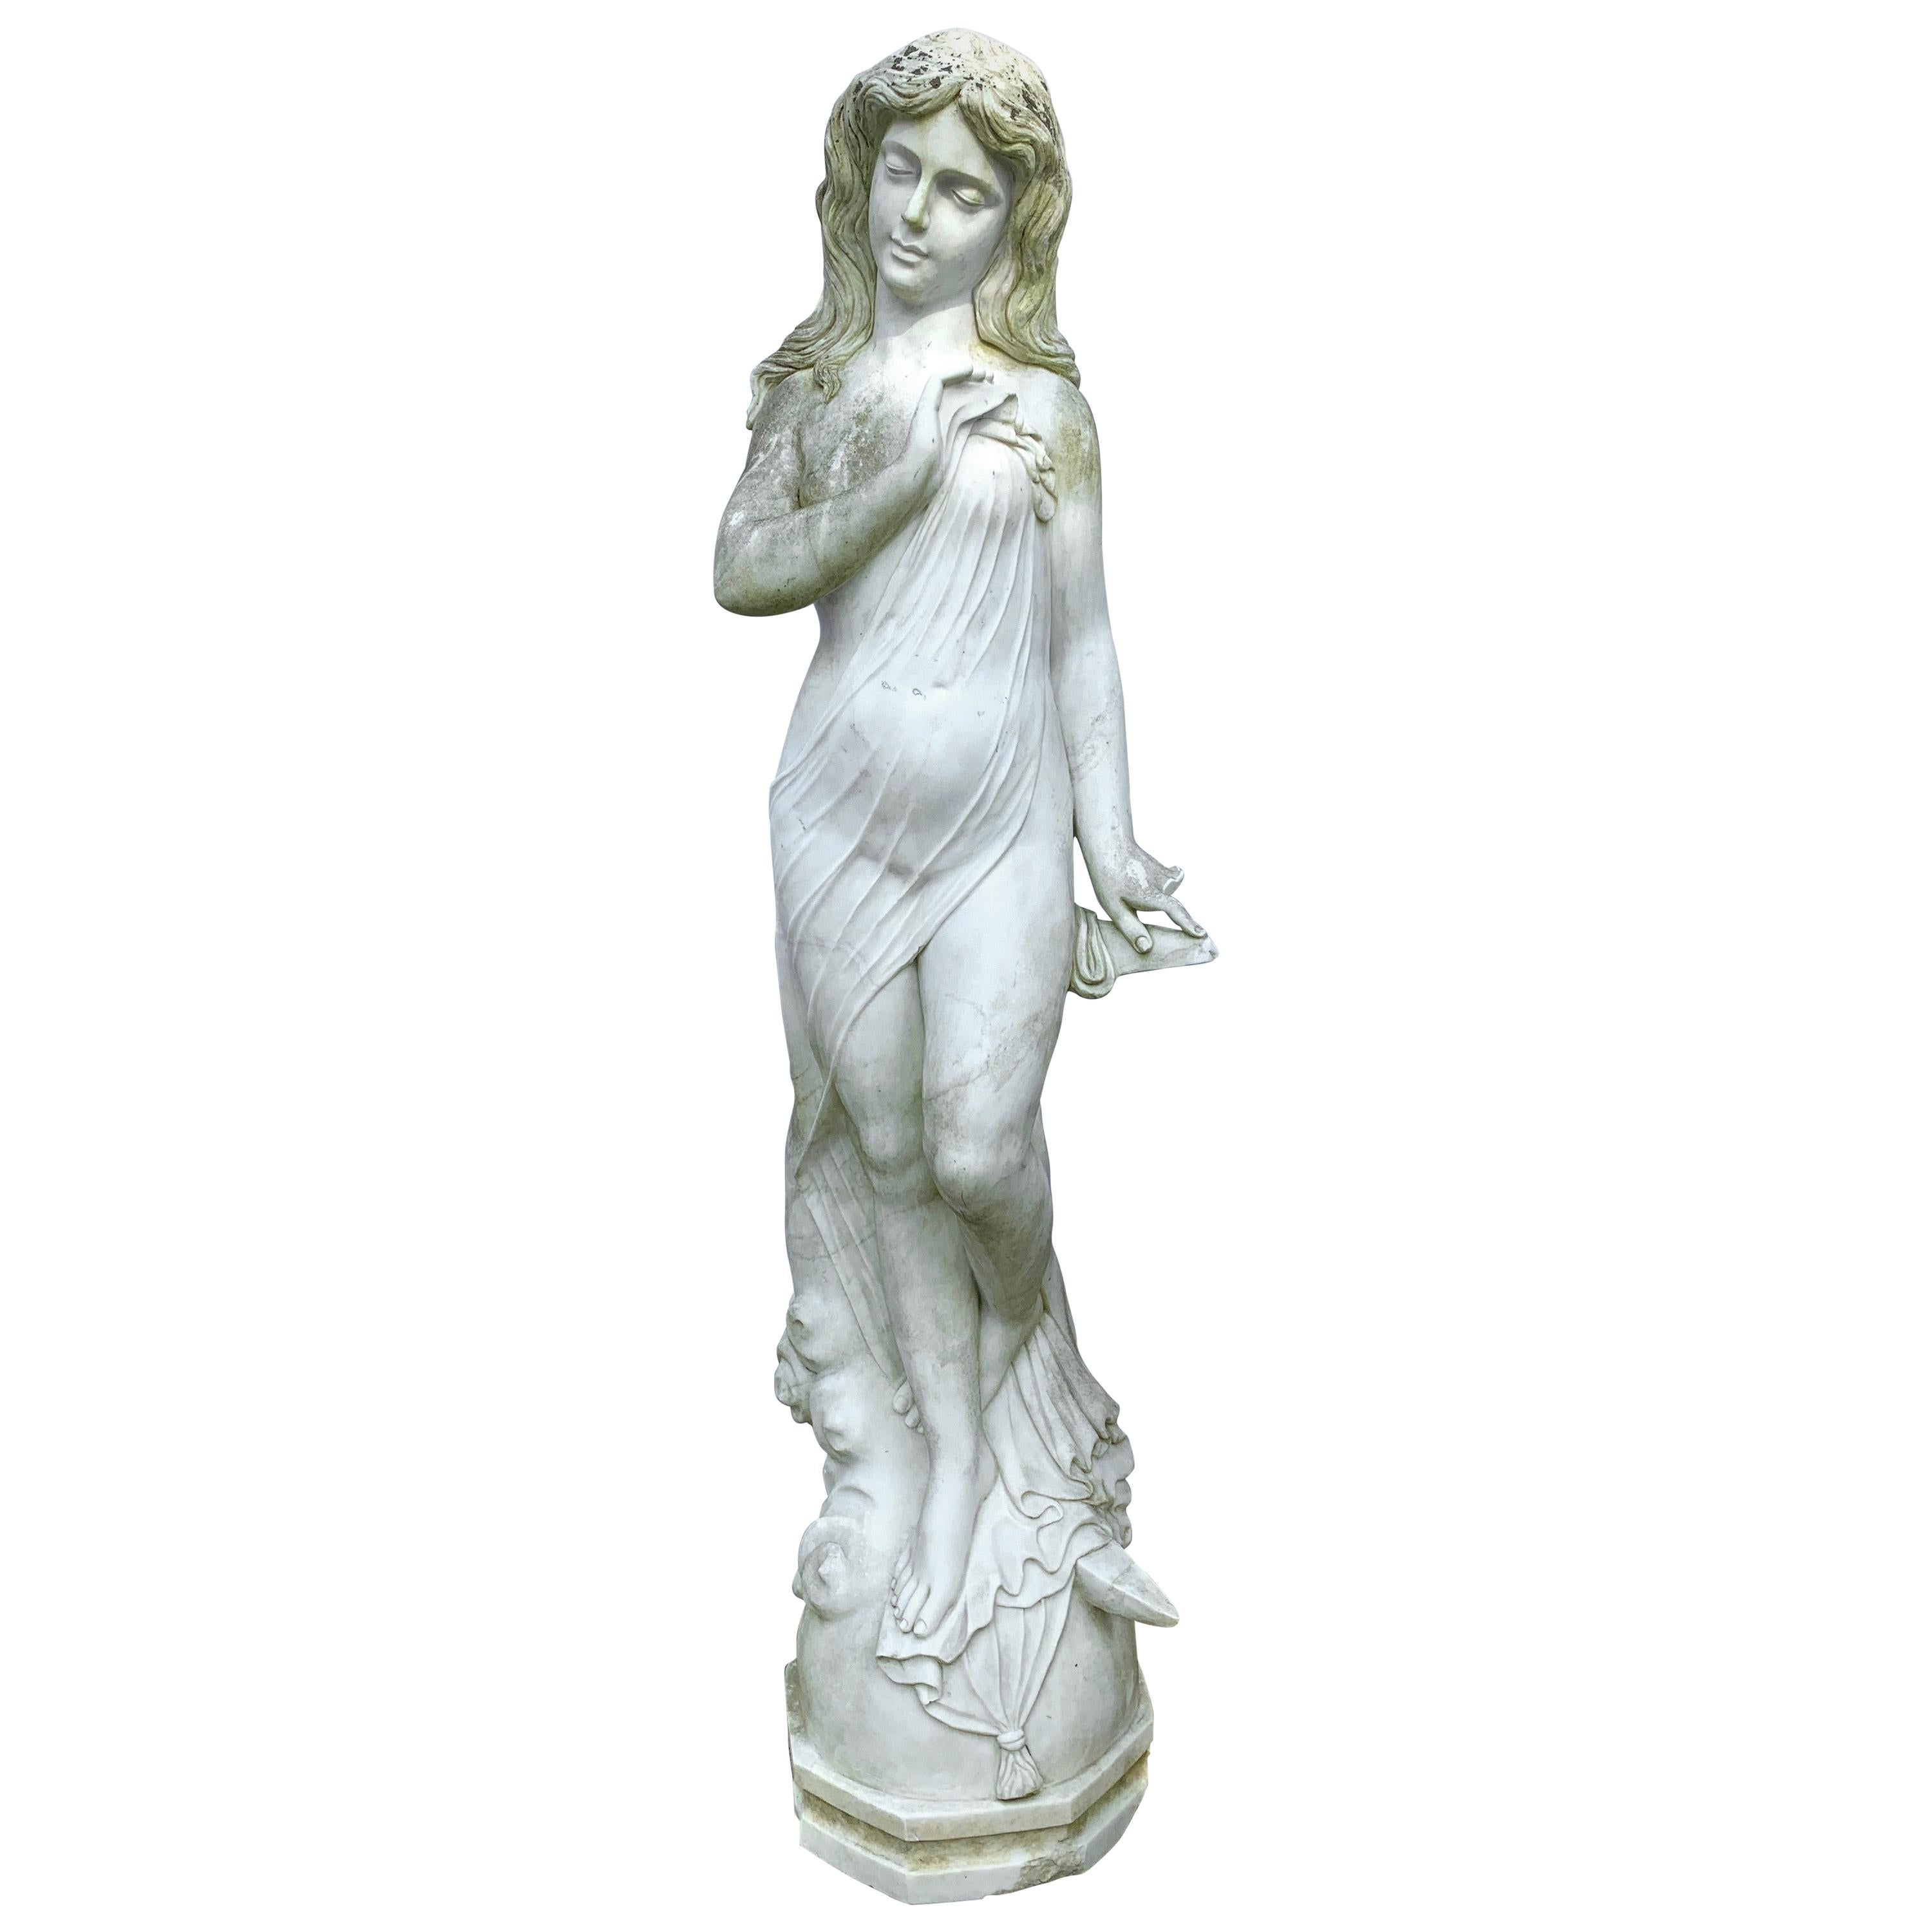 Neoclassical Greek Goddess Life-Size Marble Statue Sculpture For Sale